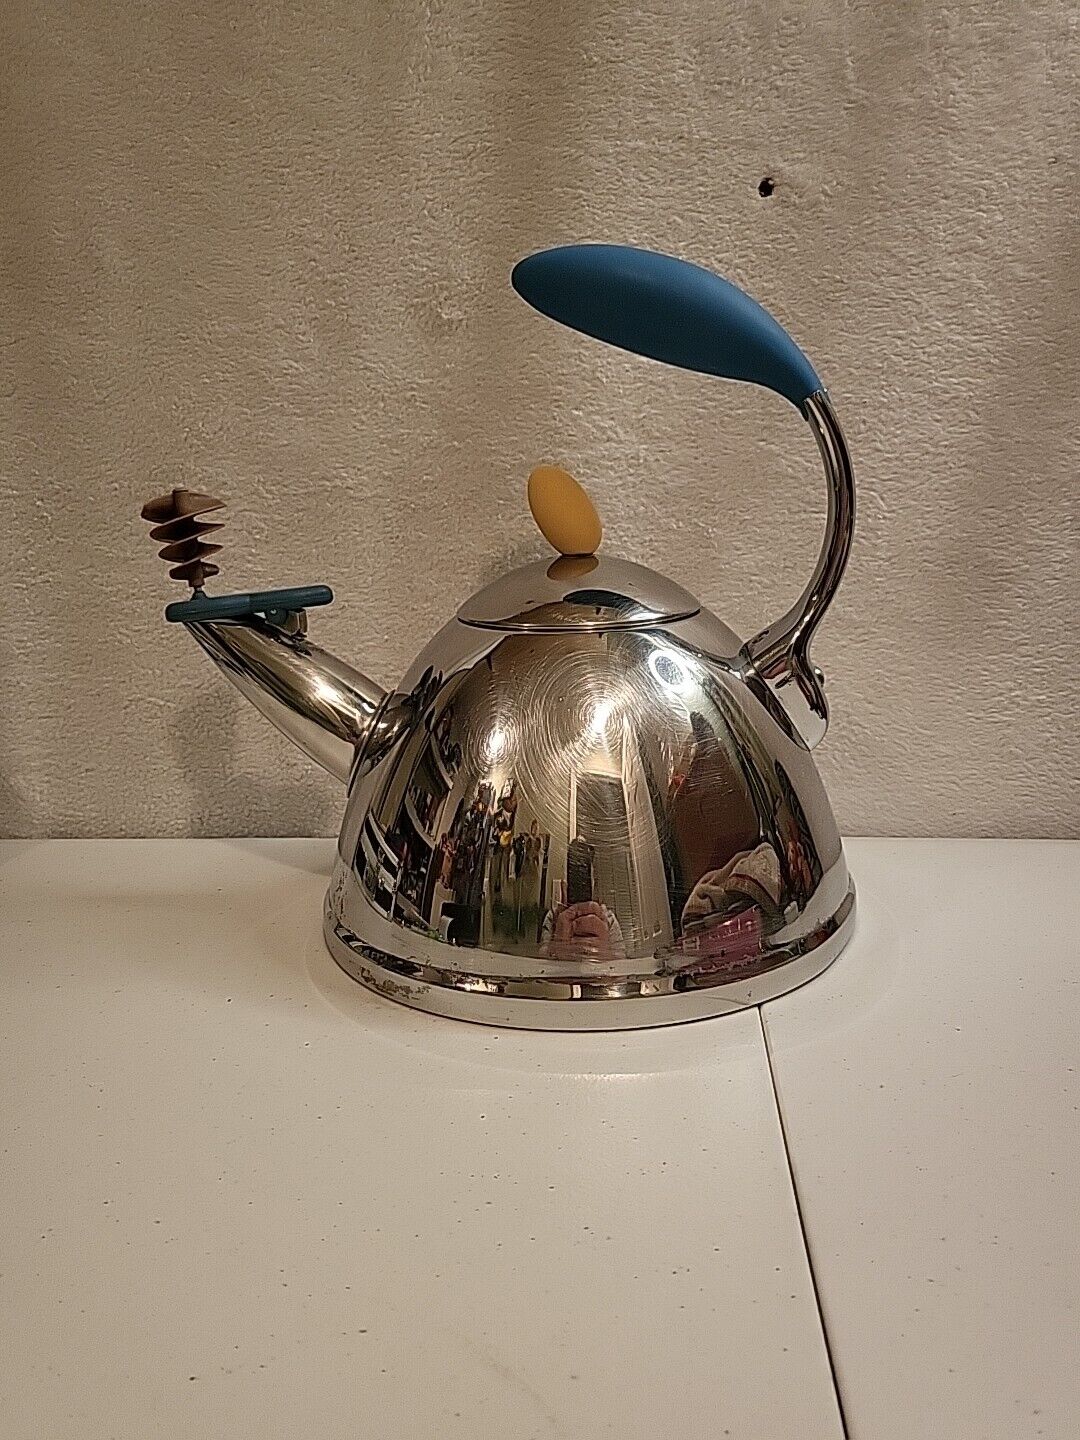 Used original Alessi Michael Graves Signed stainless steel Teapot Tea Kettle 